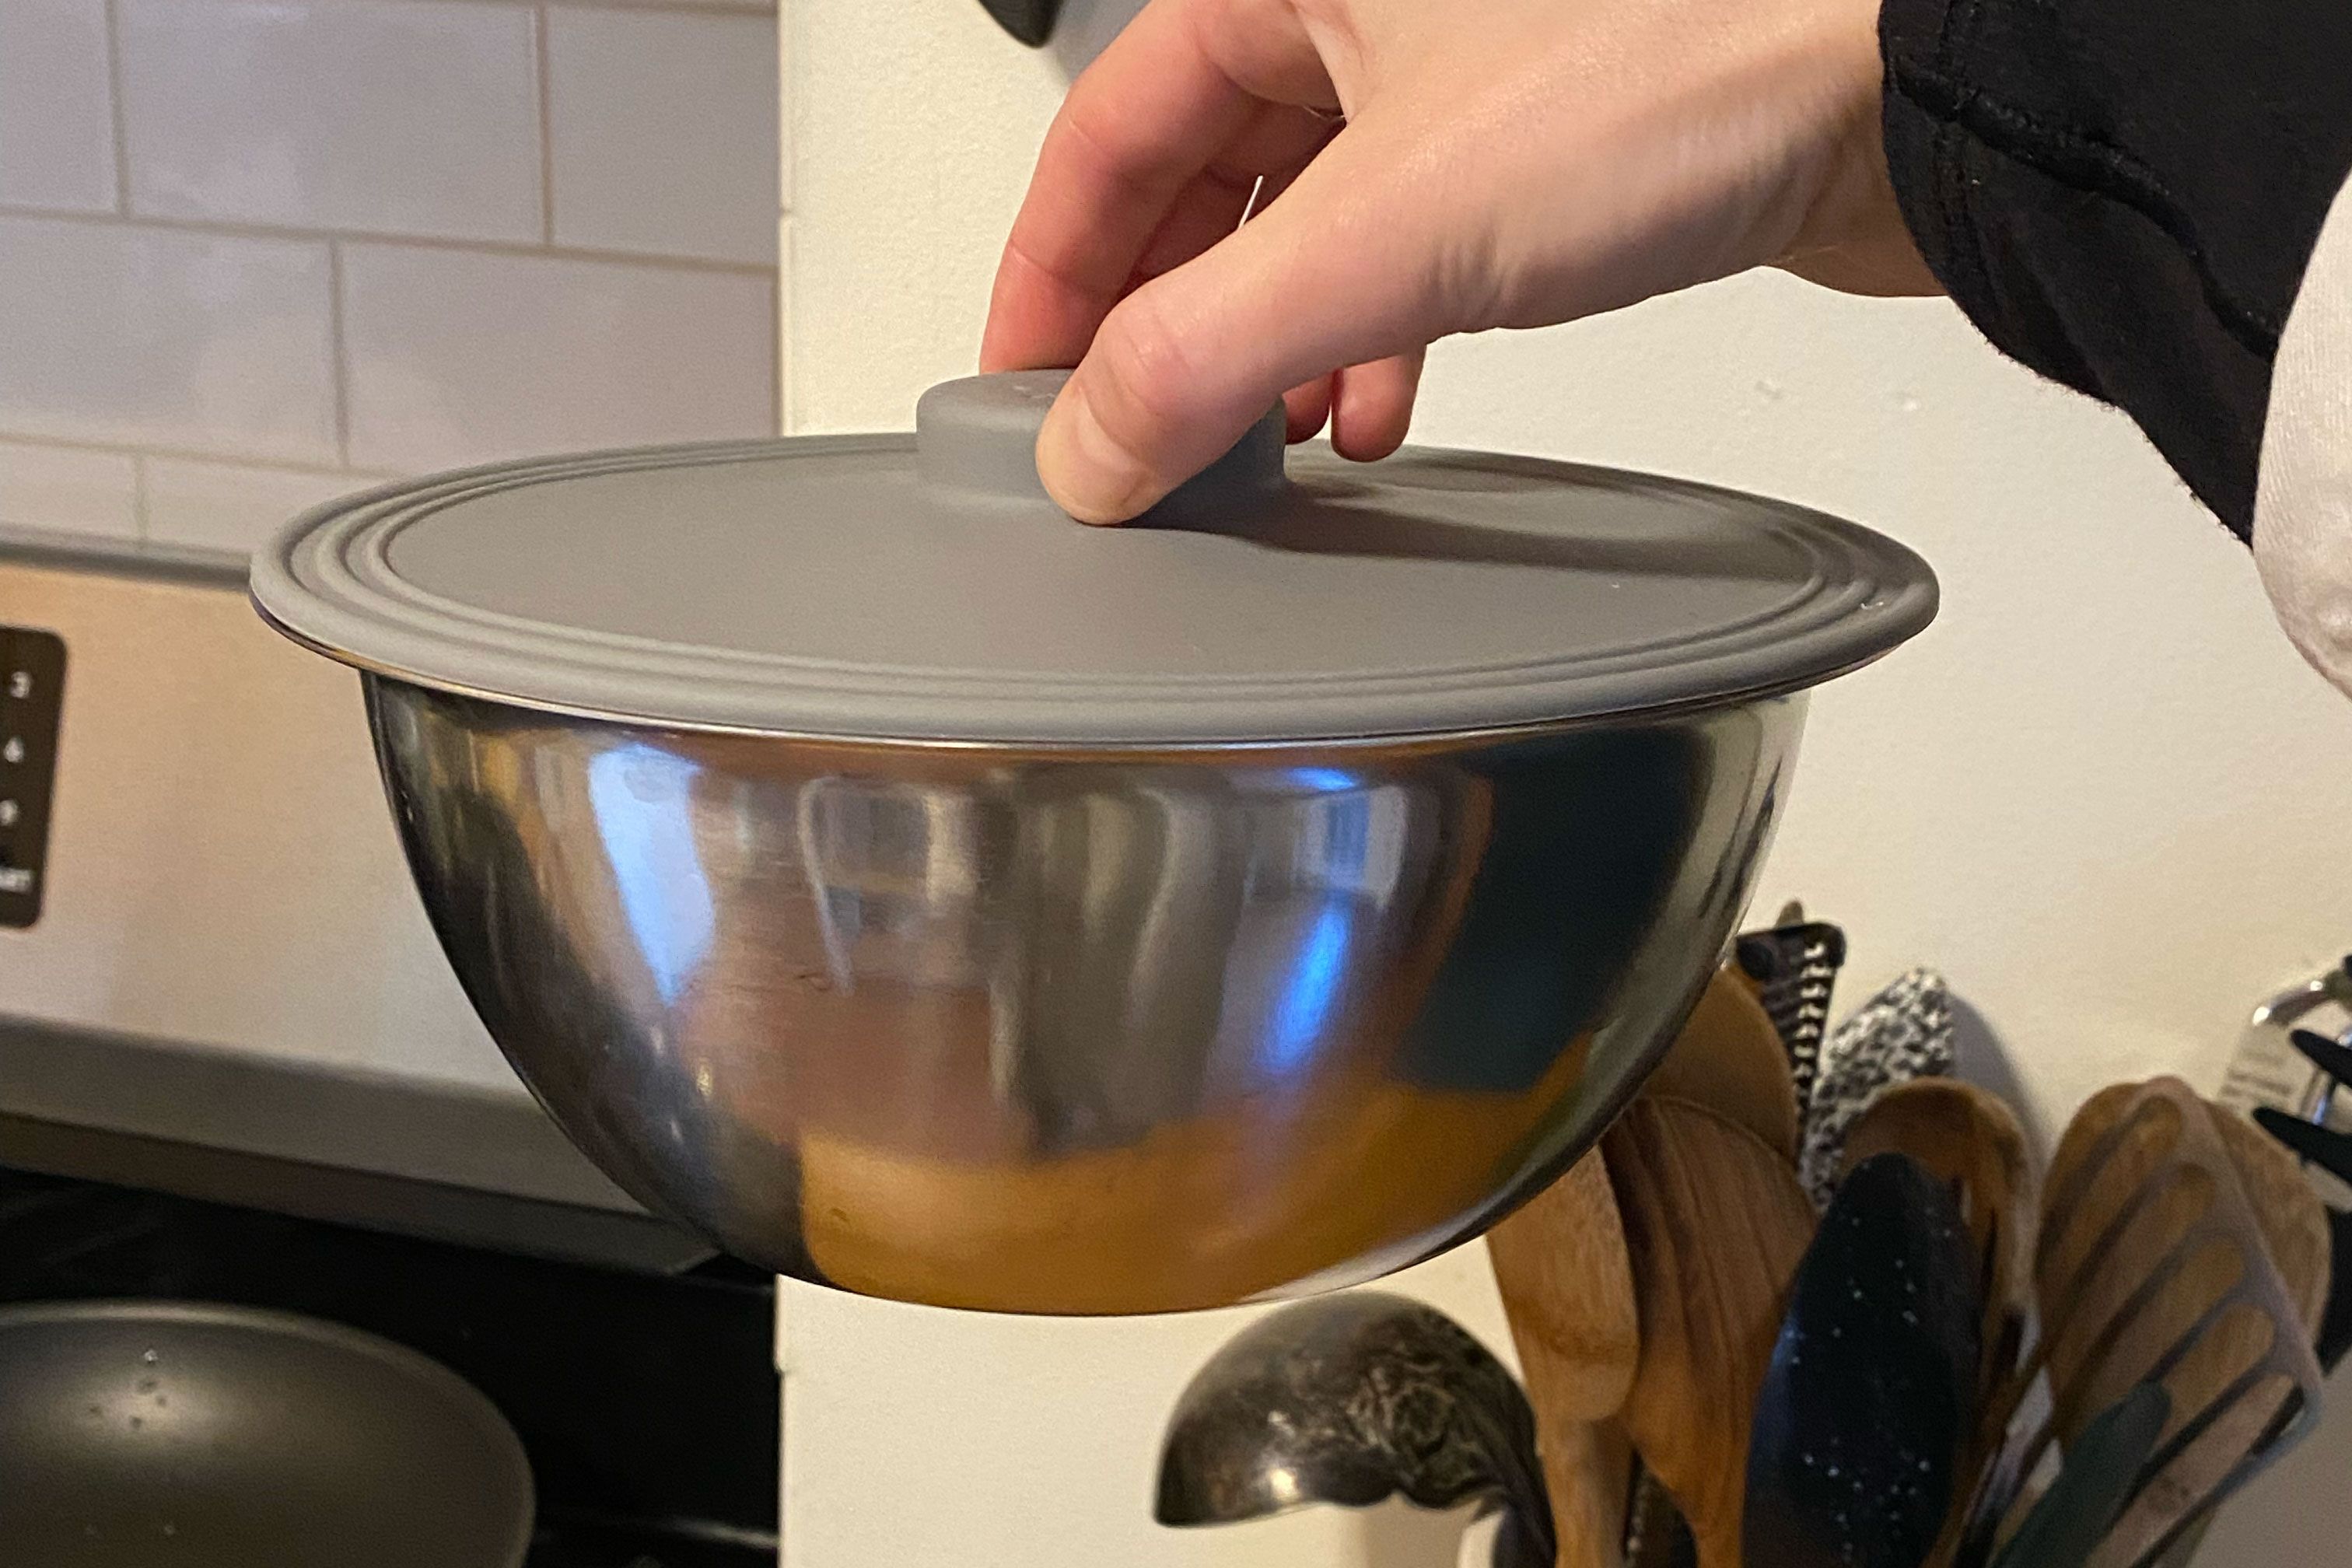 Cover and cook … when you should (and shouldn't) use lids while cooking